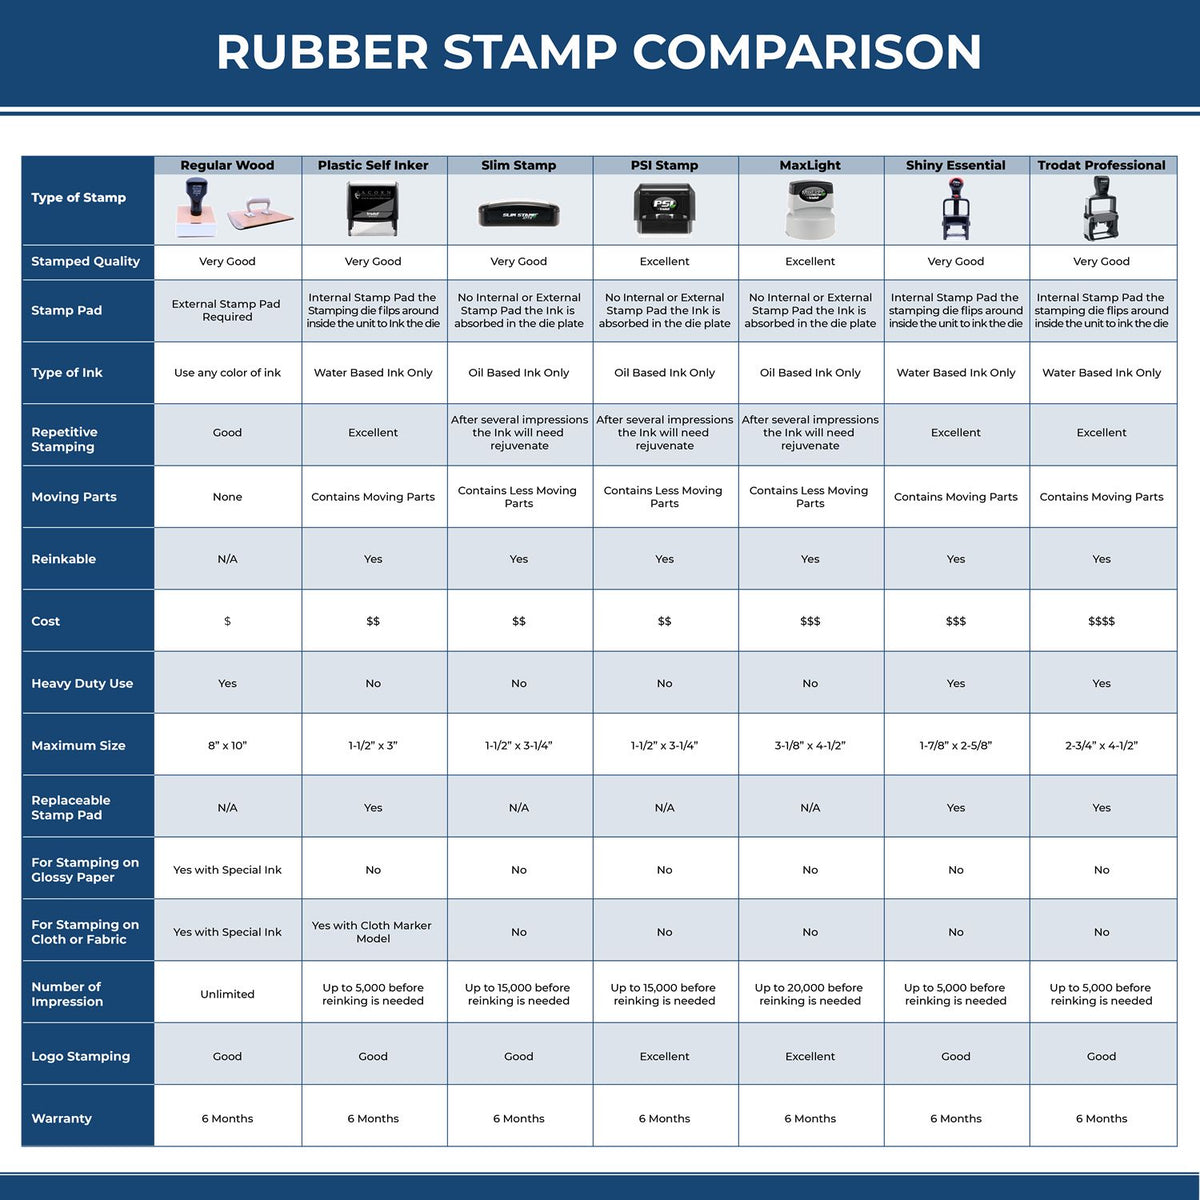 Large Formas Rubber Stamp 5548R Rubber Stamp Comparison